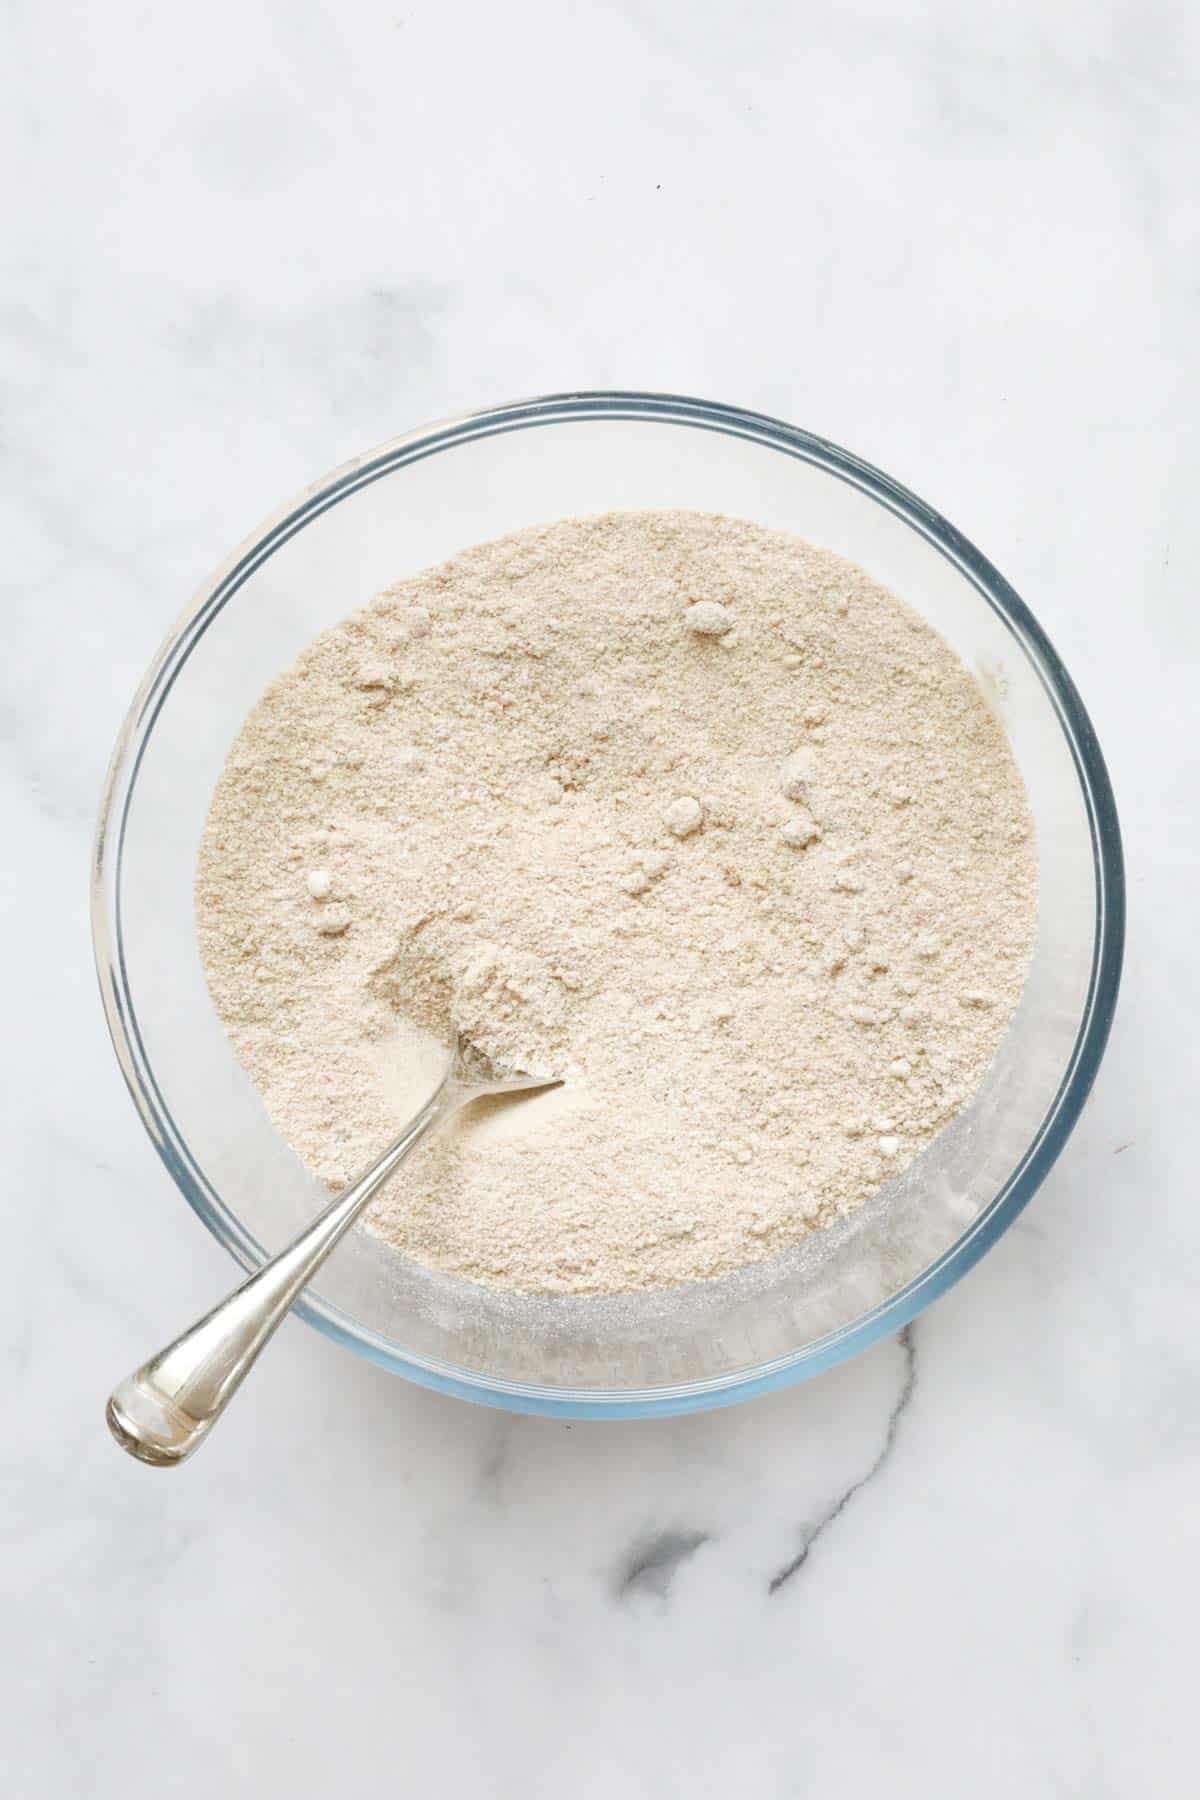 Flour, brown sugar and butter rubbed together in a bowl to the texture of breadcrumbs.